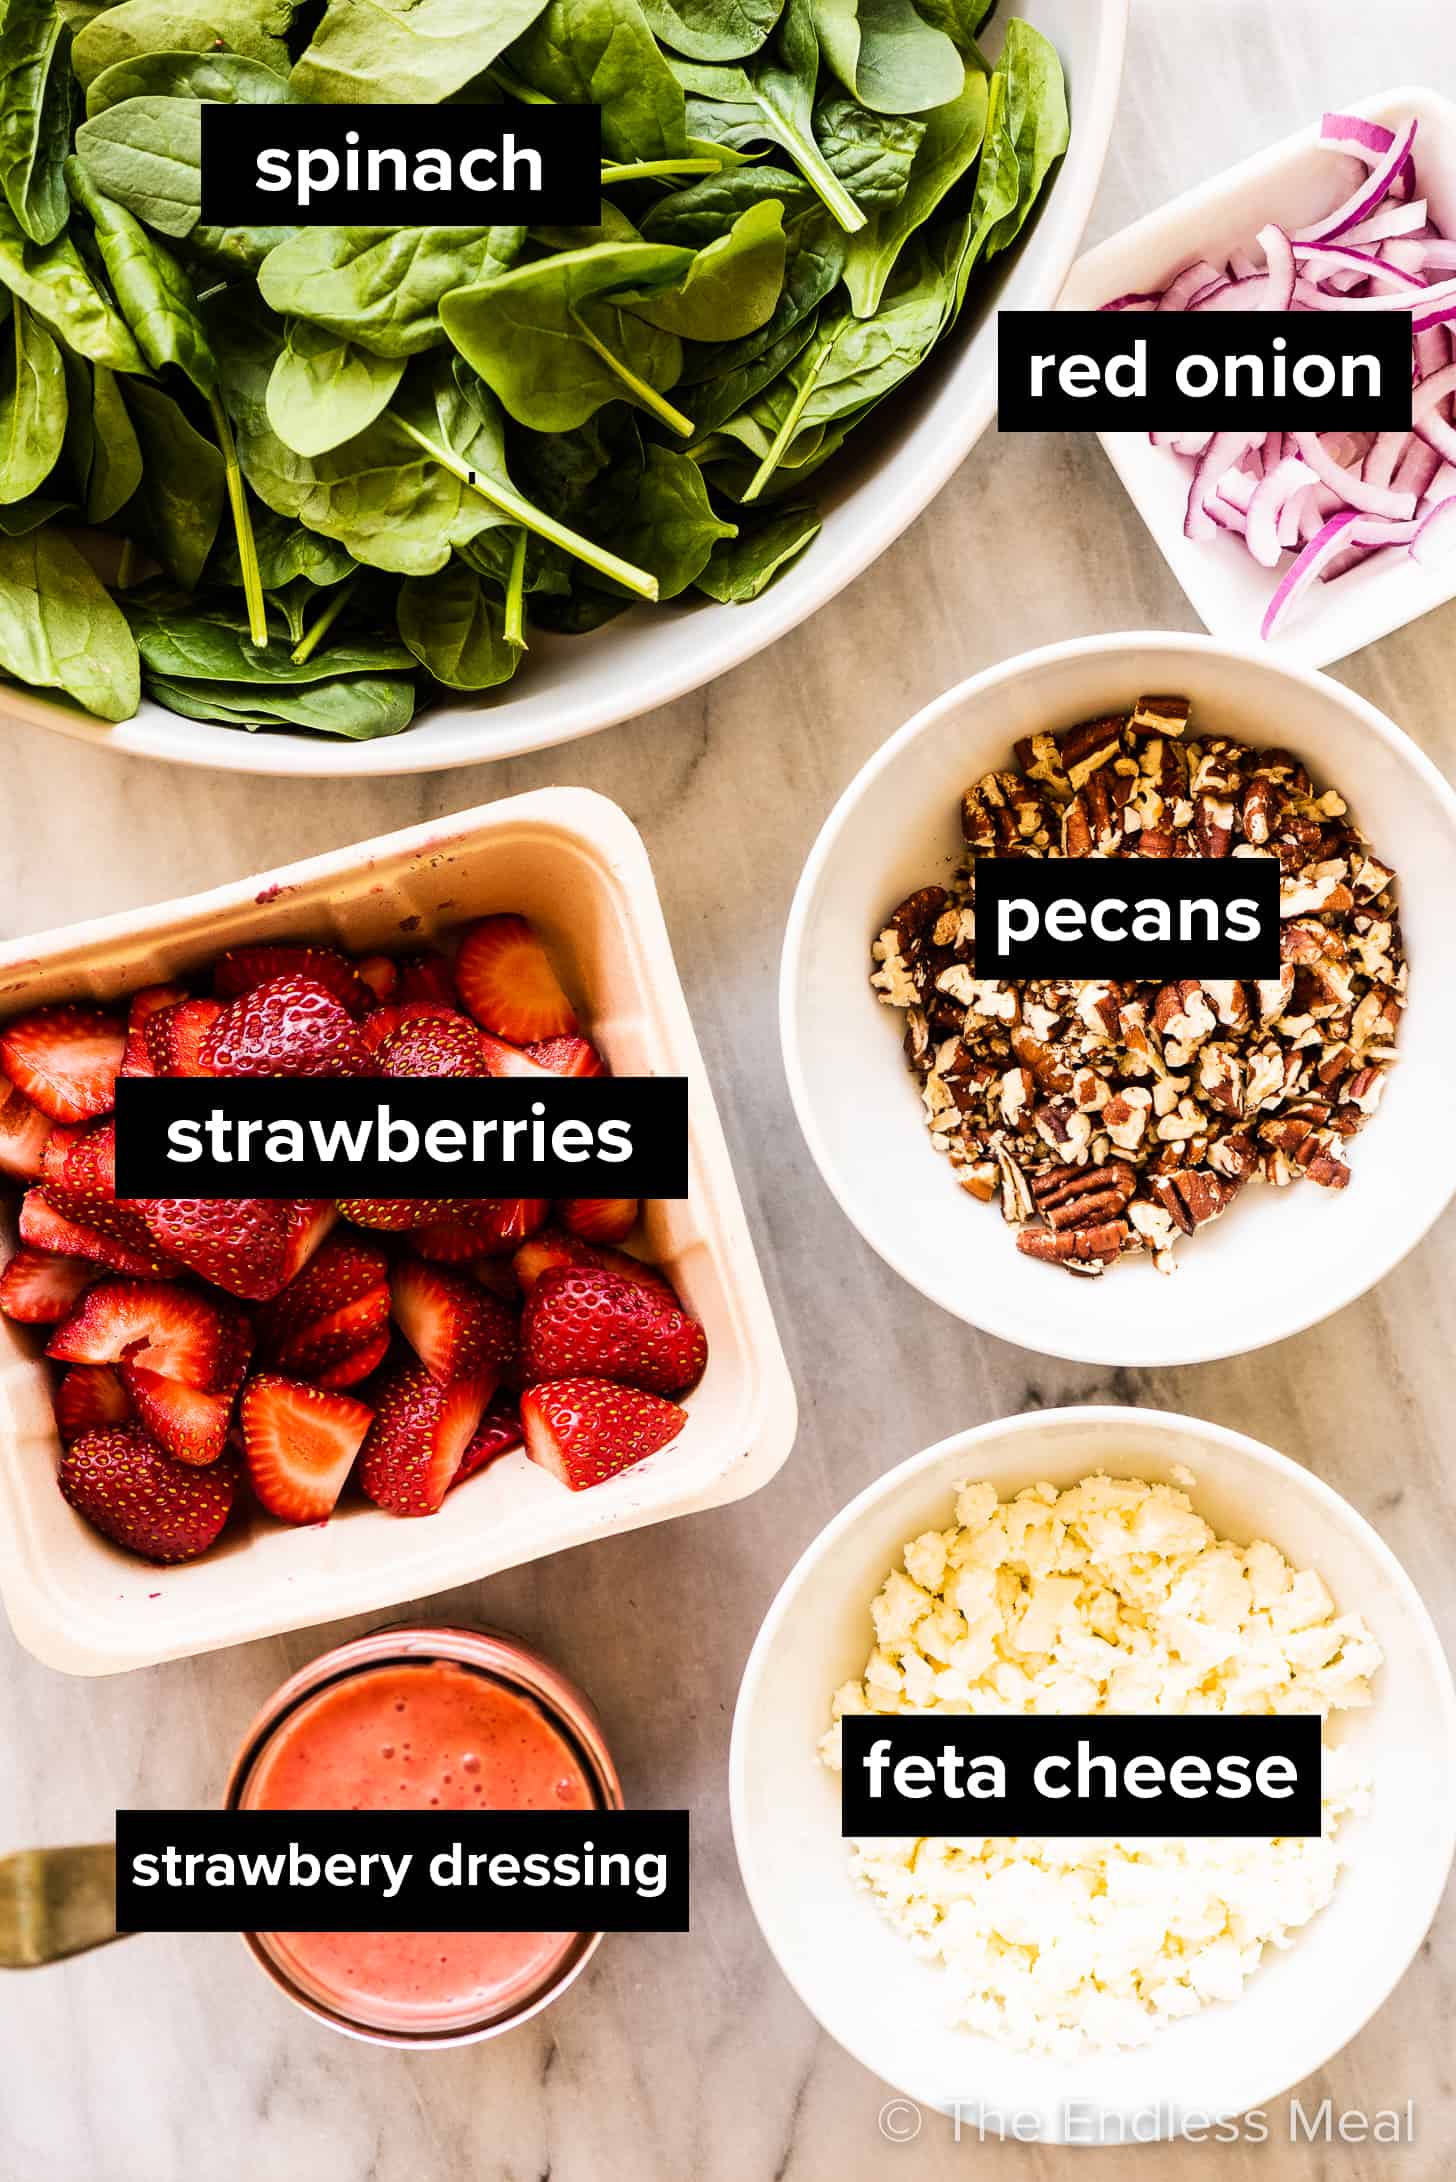 All the ingredients needed to make this spinach strawberry salad recipe.